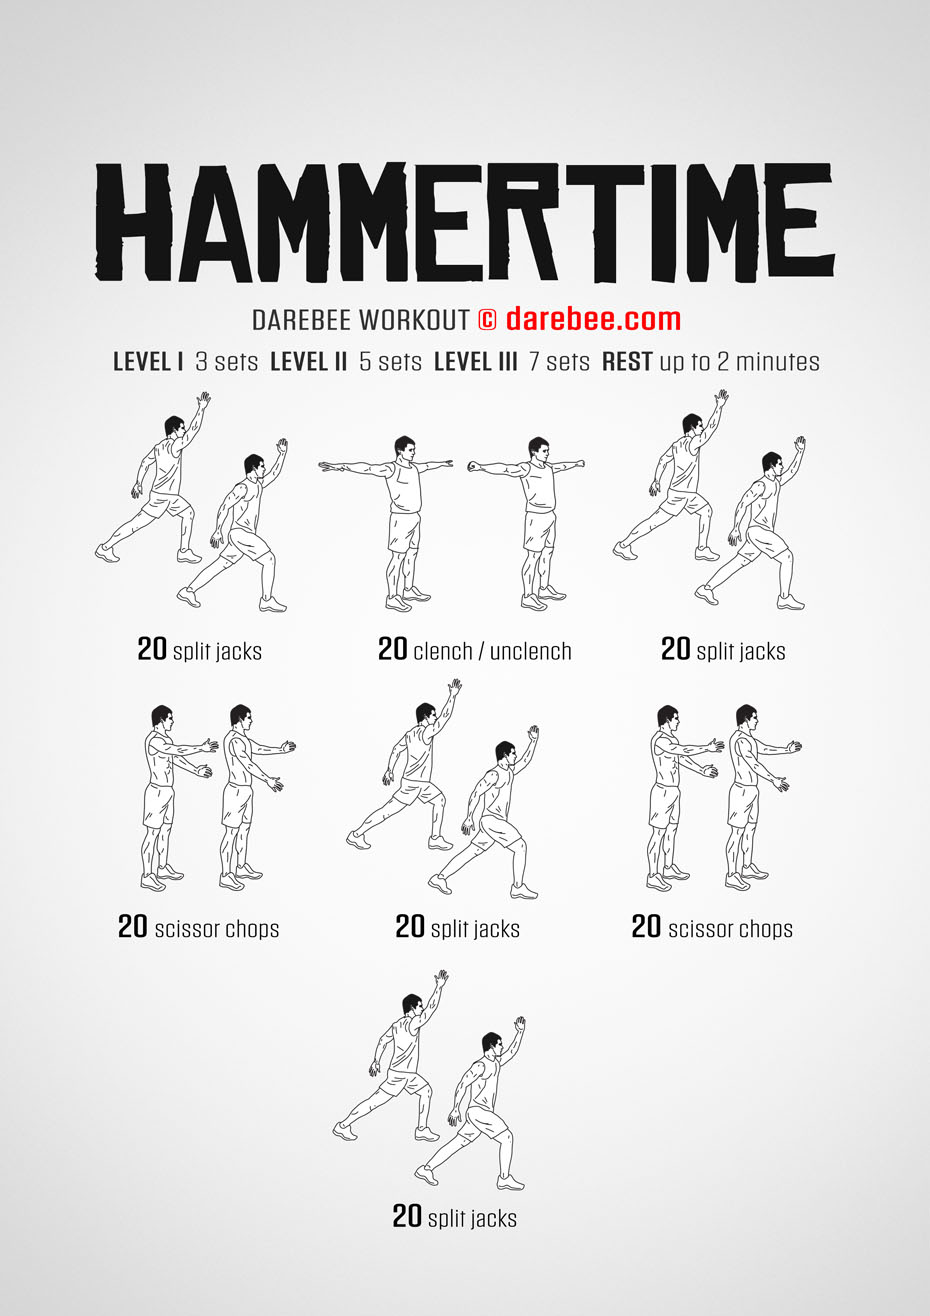 Hammertime is a DAREBEE home fitness, no-equipment fast-moving cardiovascular and aerobic workout. 